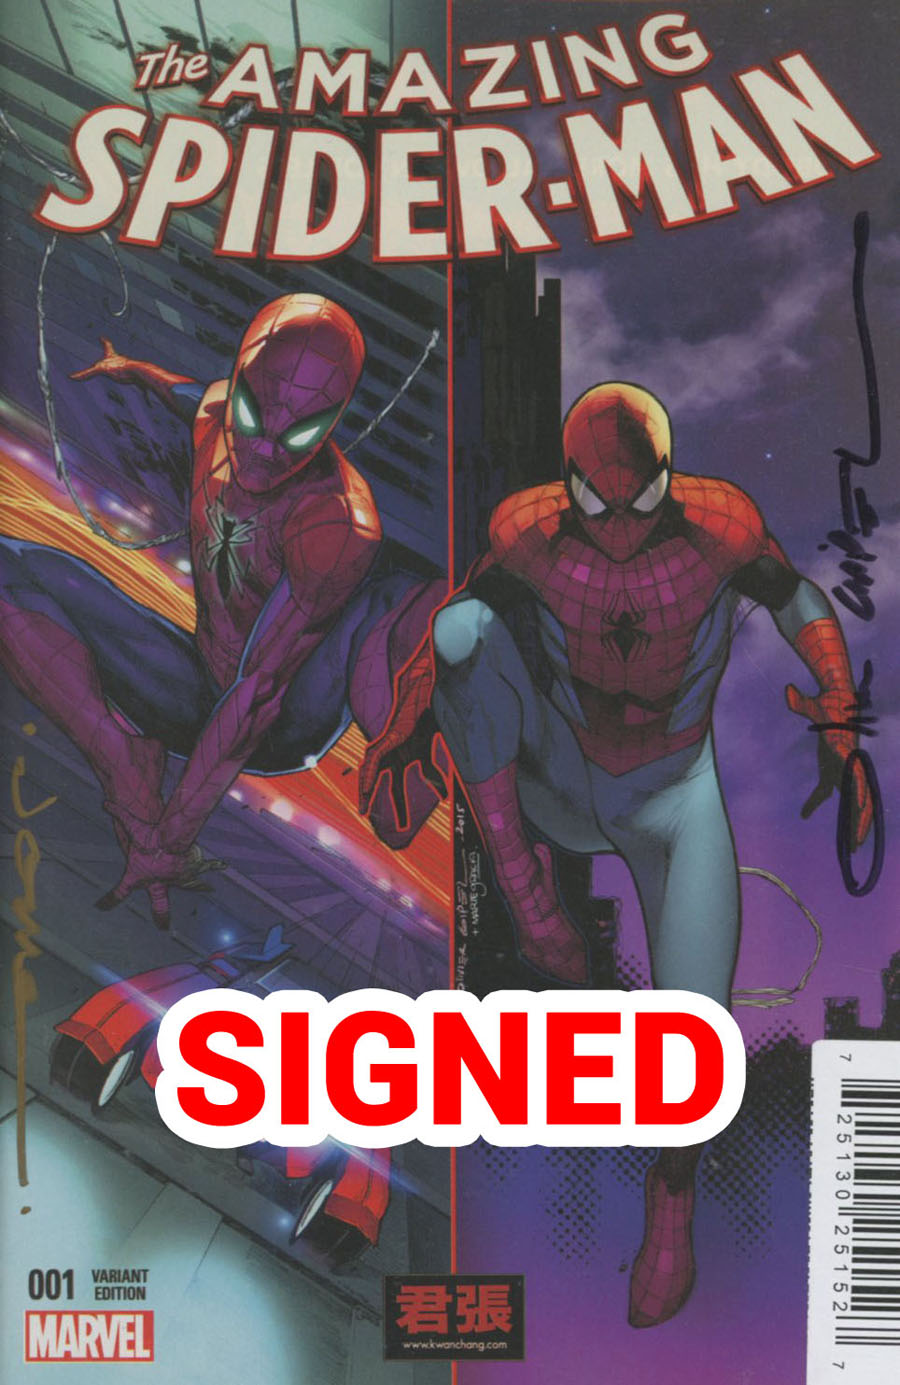 Amazing Spider-Man Vol 4 #1 Cover V DF Kwanchang Exclusive Jerome Opena & Olivier Coipel Variant Cover Signed By Jerome Opena & Olivier Coipel